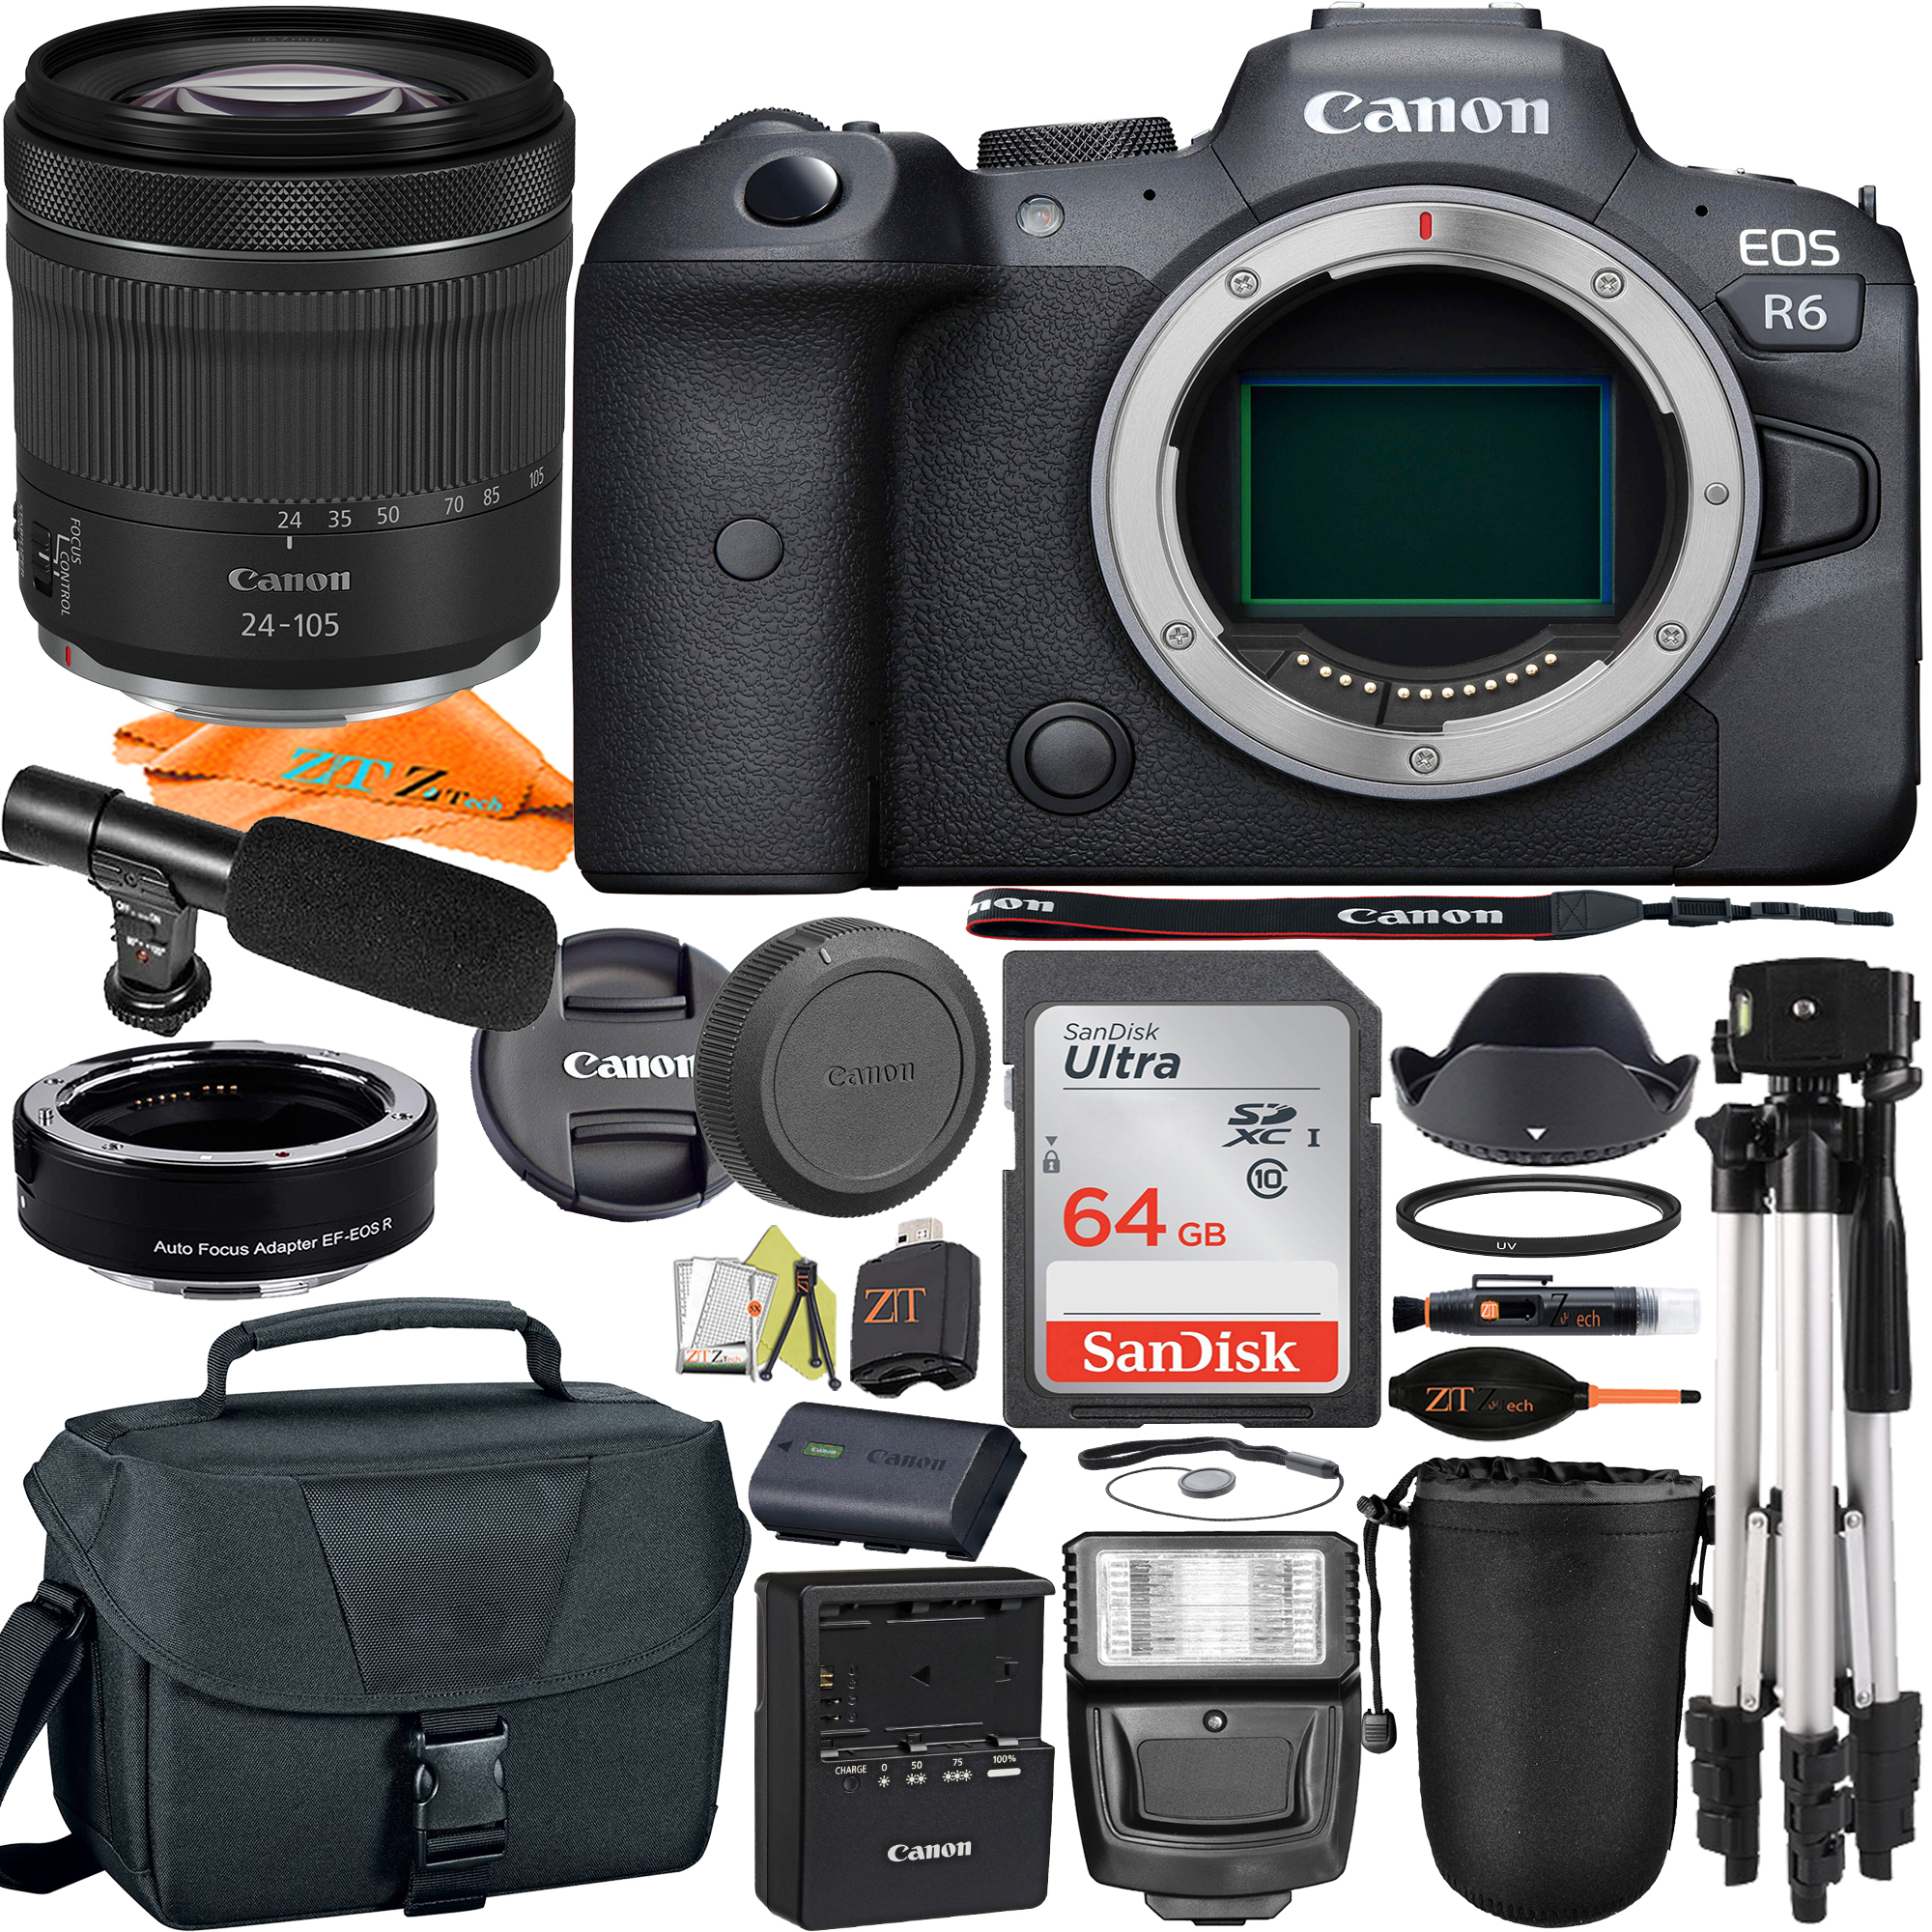 Canon EOS R6 Mirrorless Digital Camera with RF 24-105mm STM Lens + Mount Adapter + SanDisk 64GB + ZeeTech Accessory Bundle